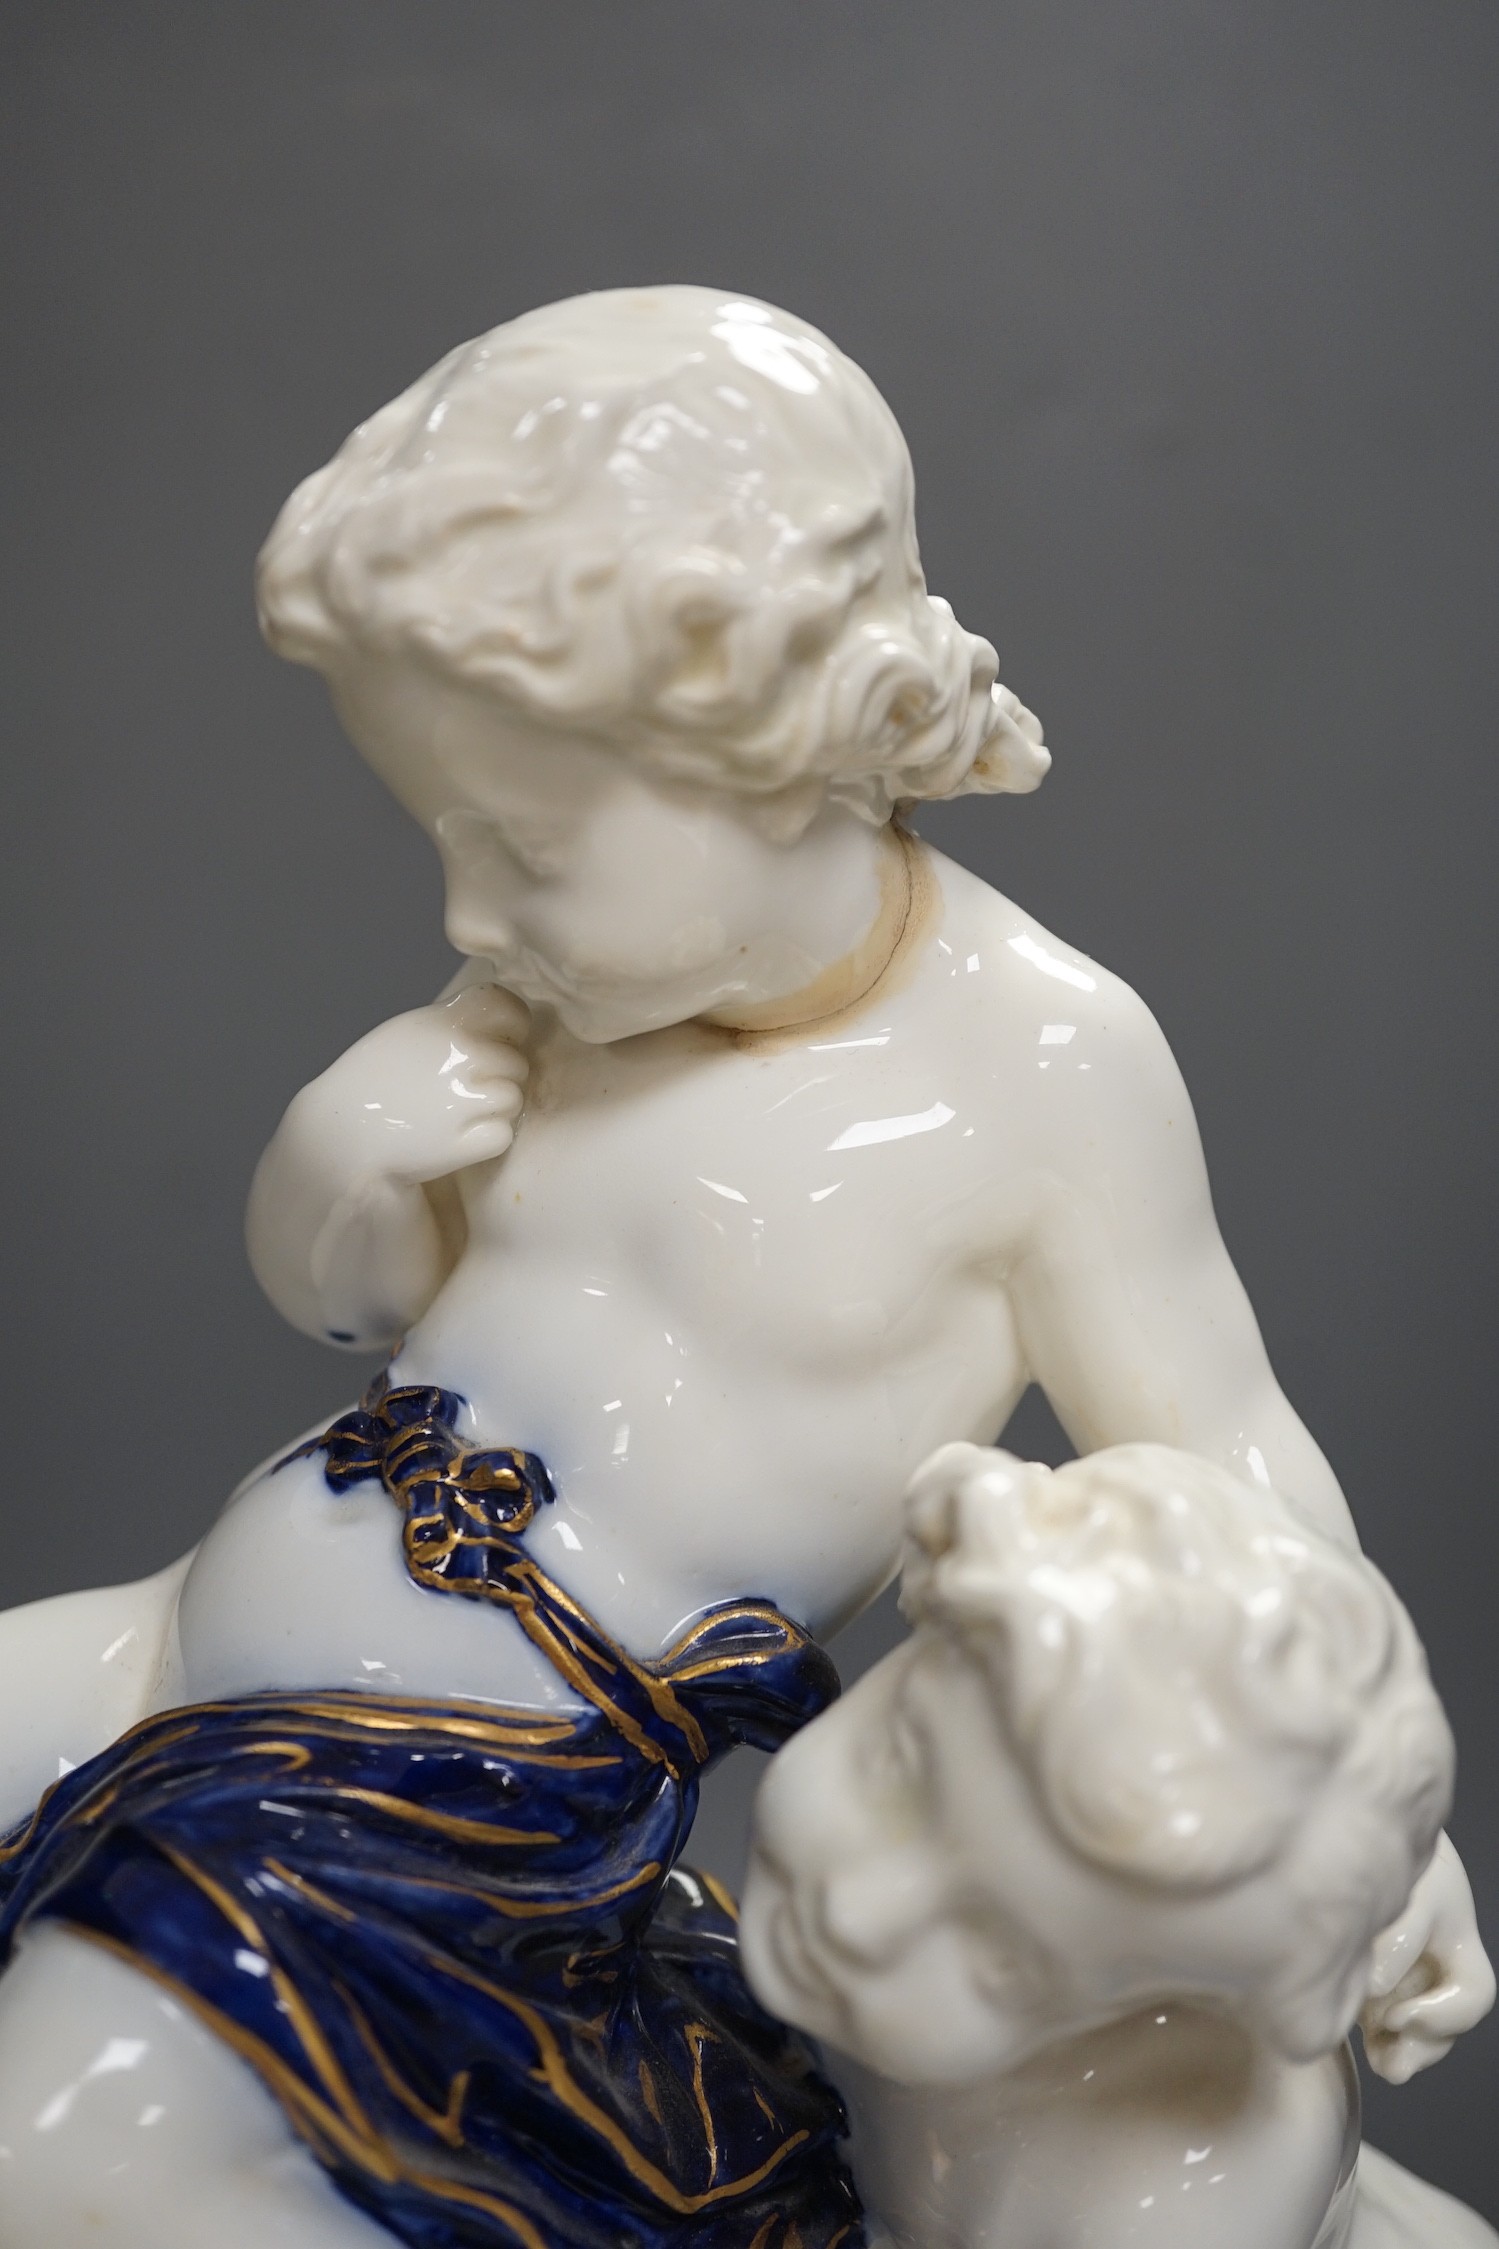 A Copeland porcelain putti seated on a shell centrepiece, modelled O. Hale, c.1877, 35cms high